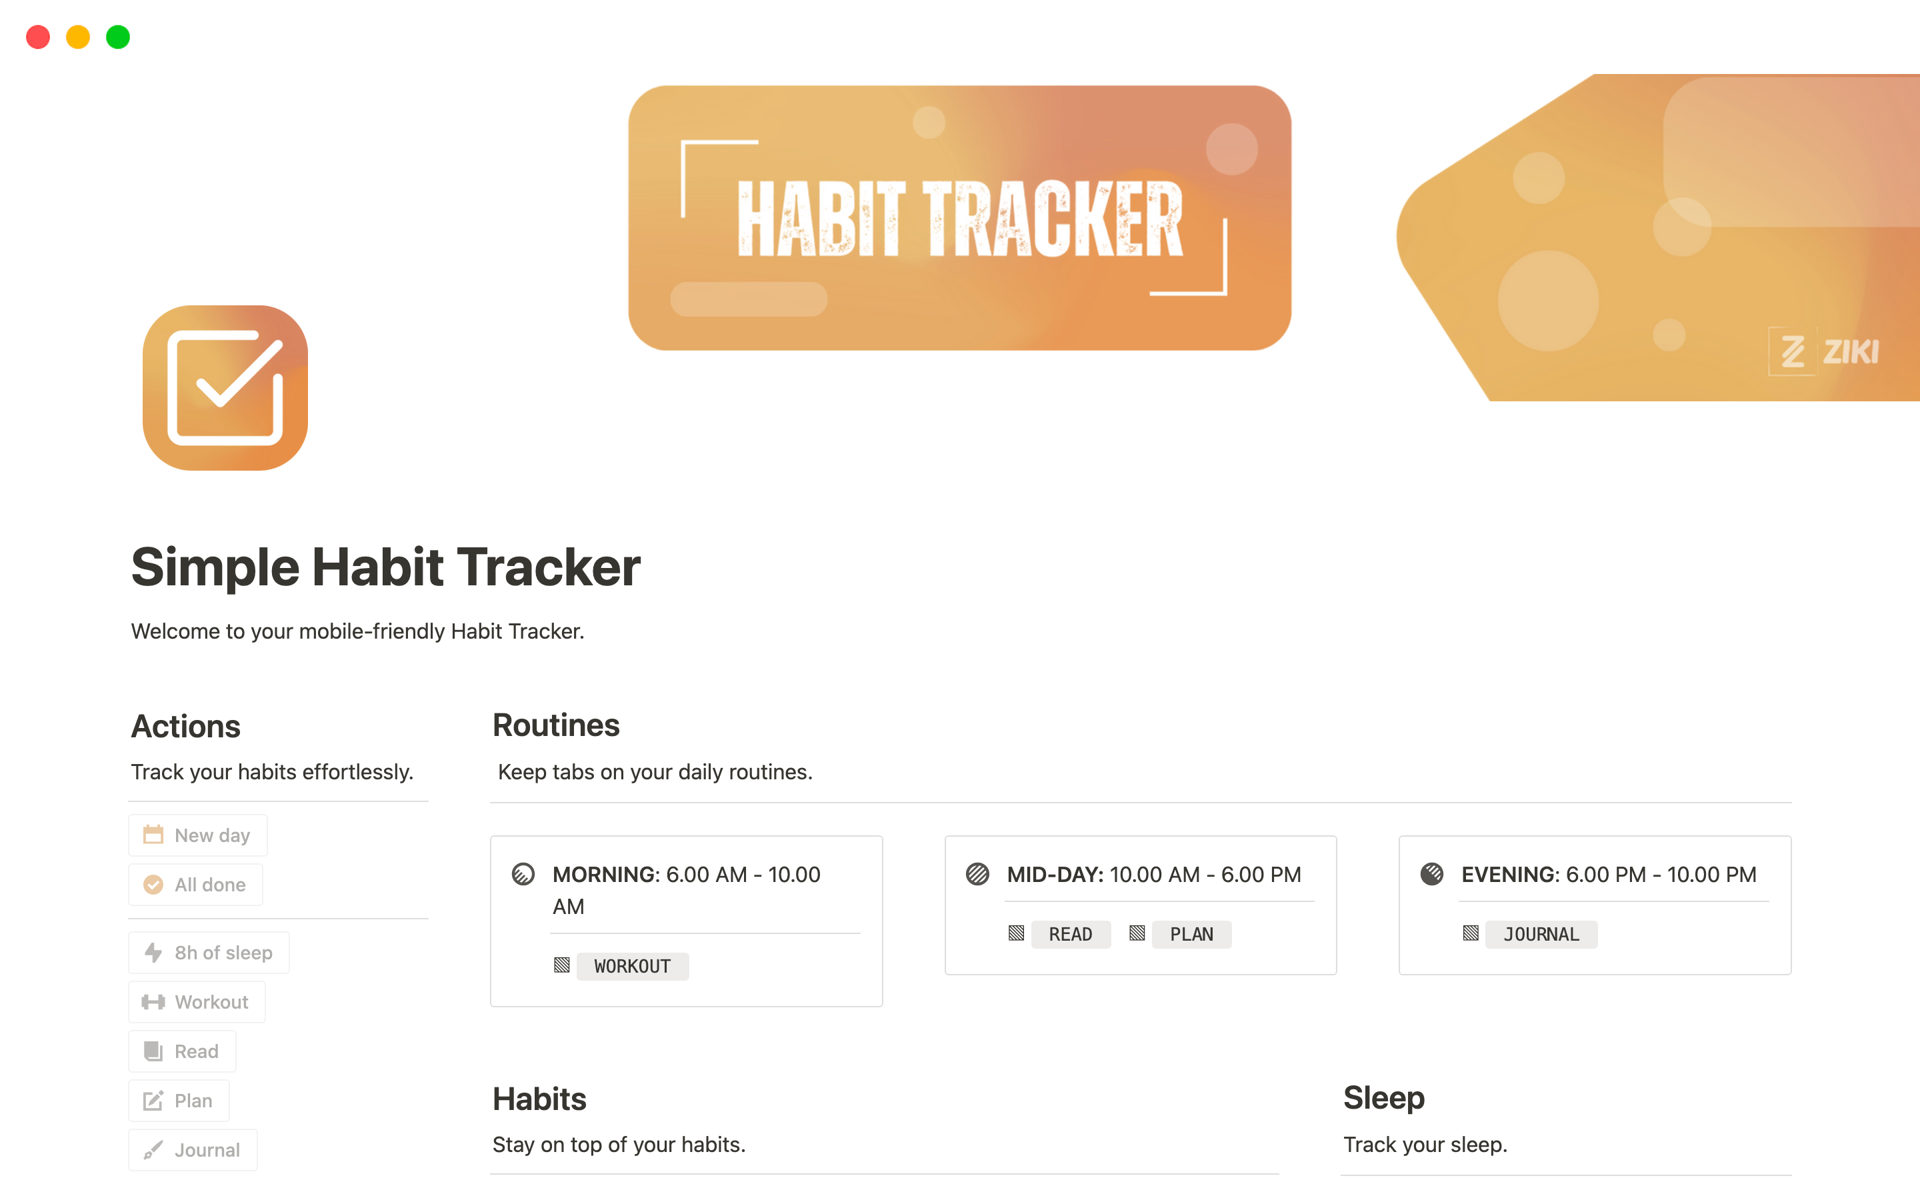 A powerful, intuitive, and mobile-friendly habit tracking tool with analytics capabilities, built and designed like an app, to help you master consistency and take charge of your habits. Includes a habit, sleep and routine tracker.